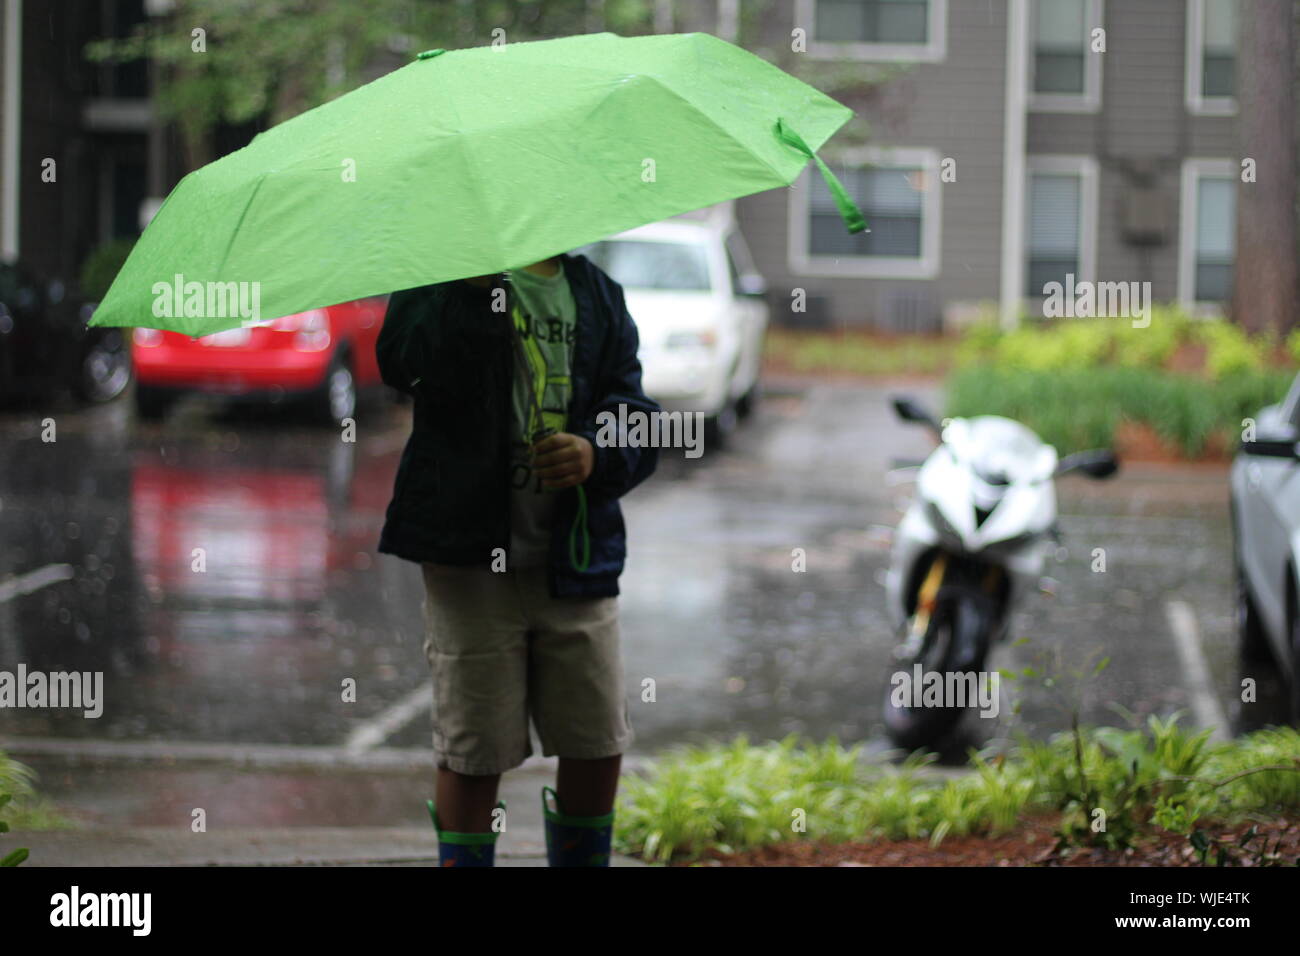 Midsection Of Boy With Umbrella Standing On Street During Rainfall Stock Photo